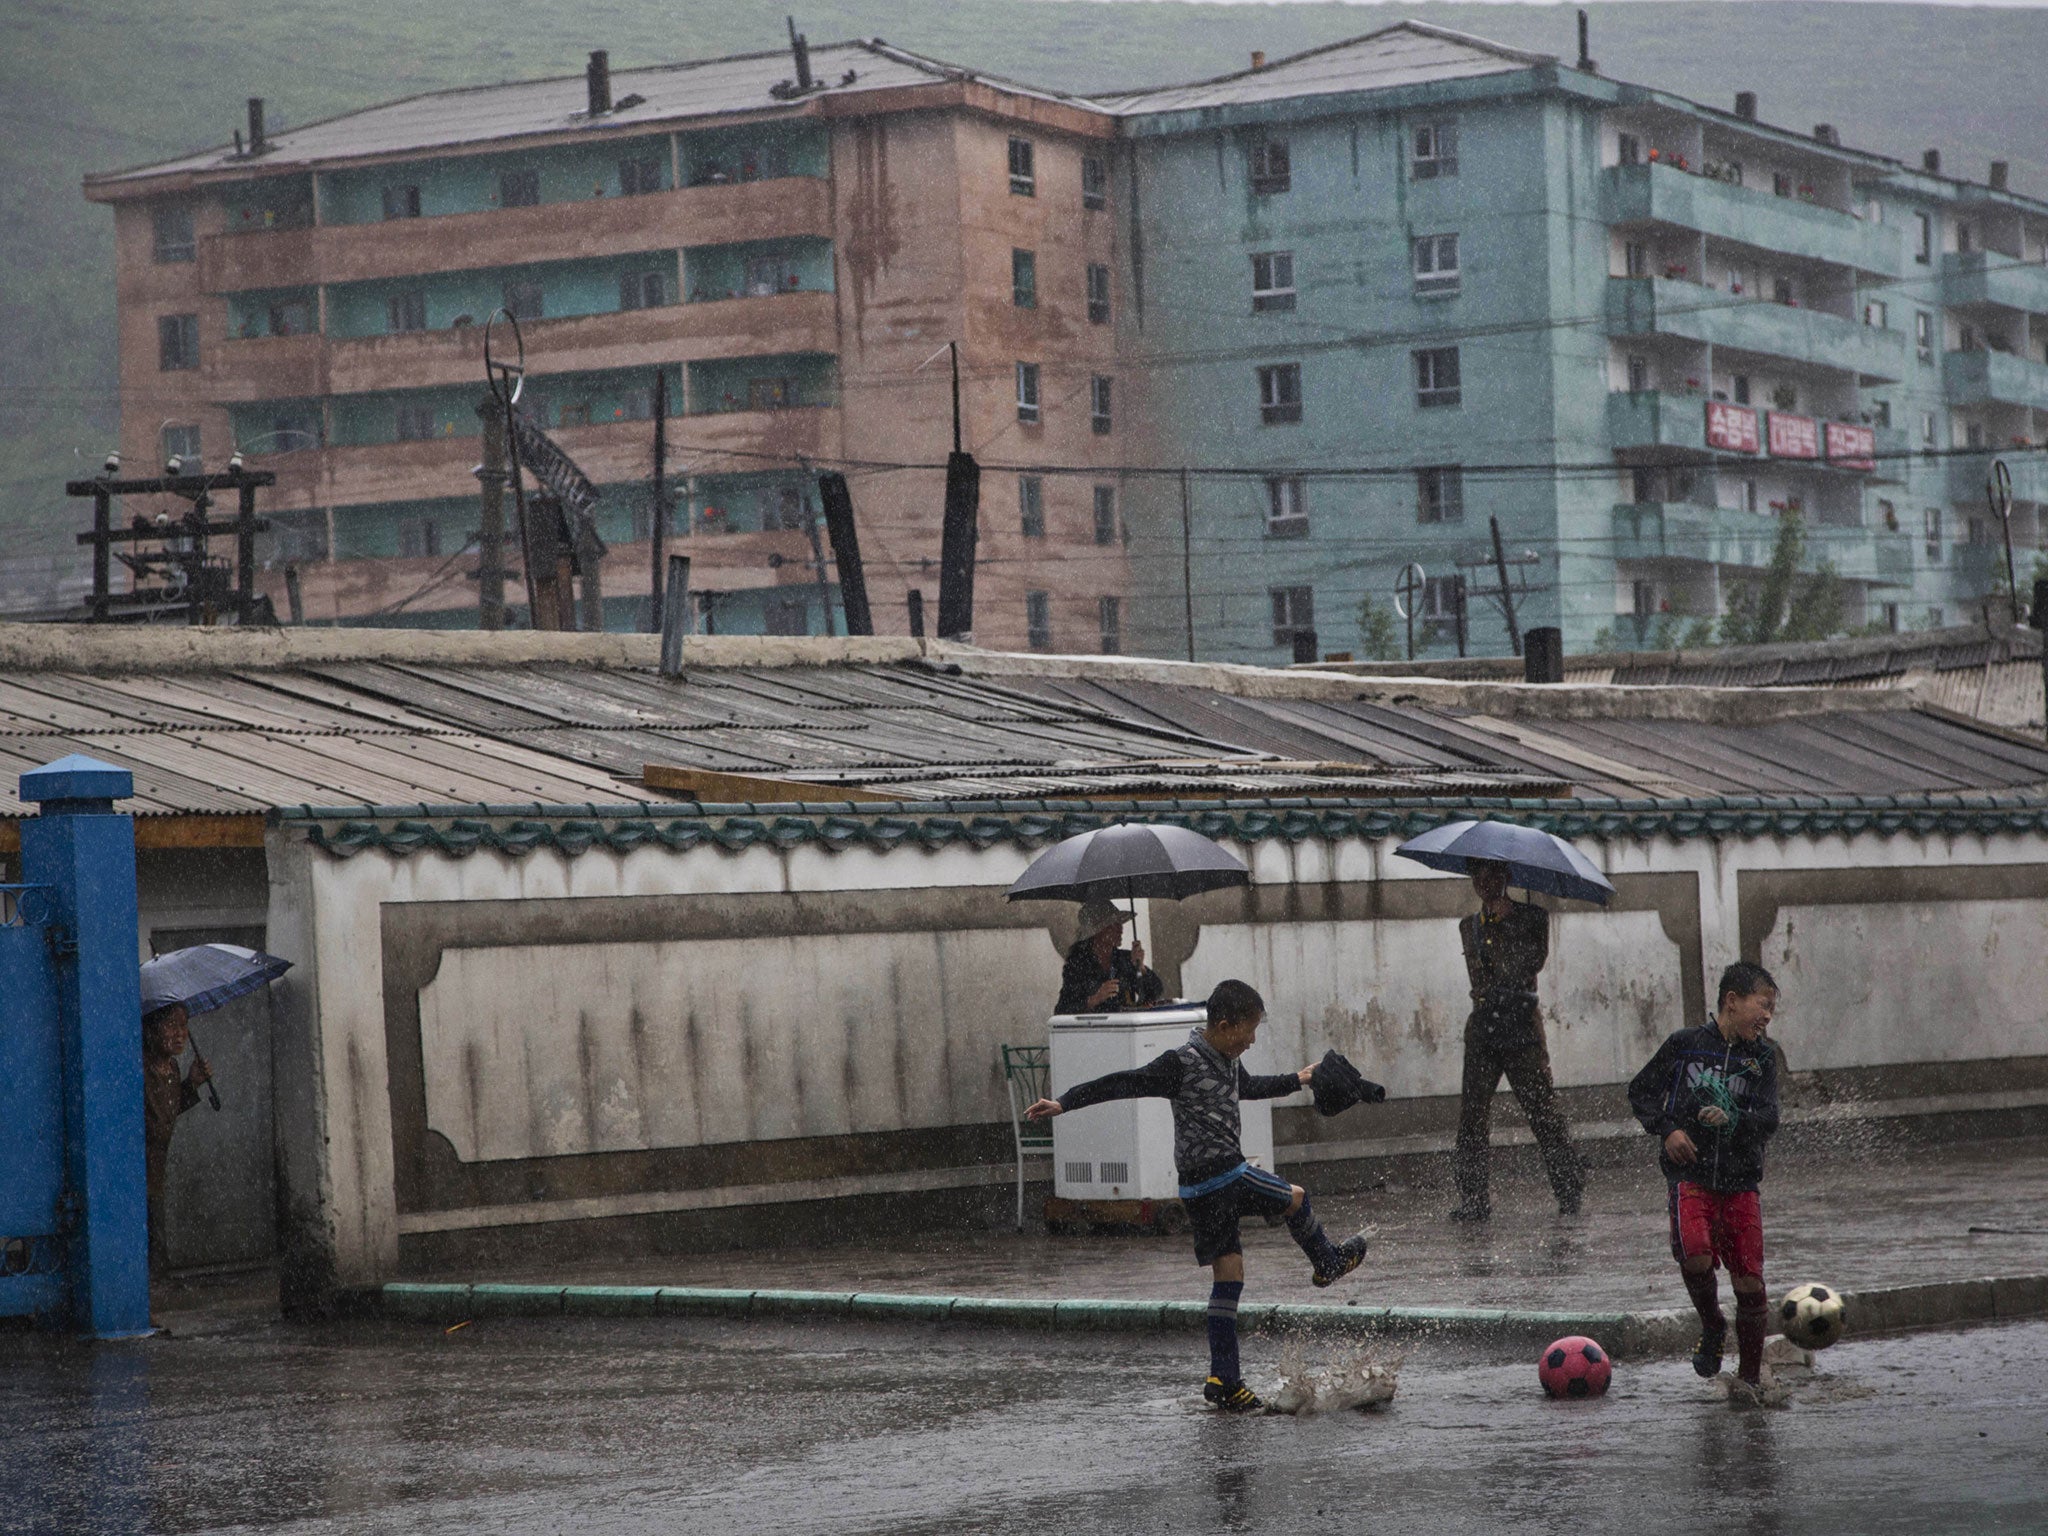 Boys play soccer in the town of Hyesan in North Korea's Ryanggang province.